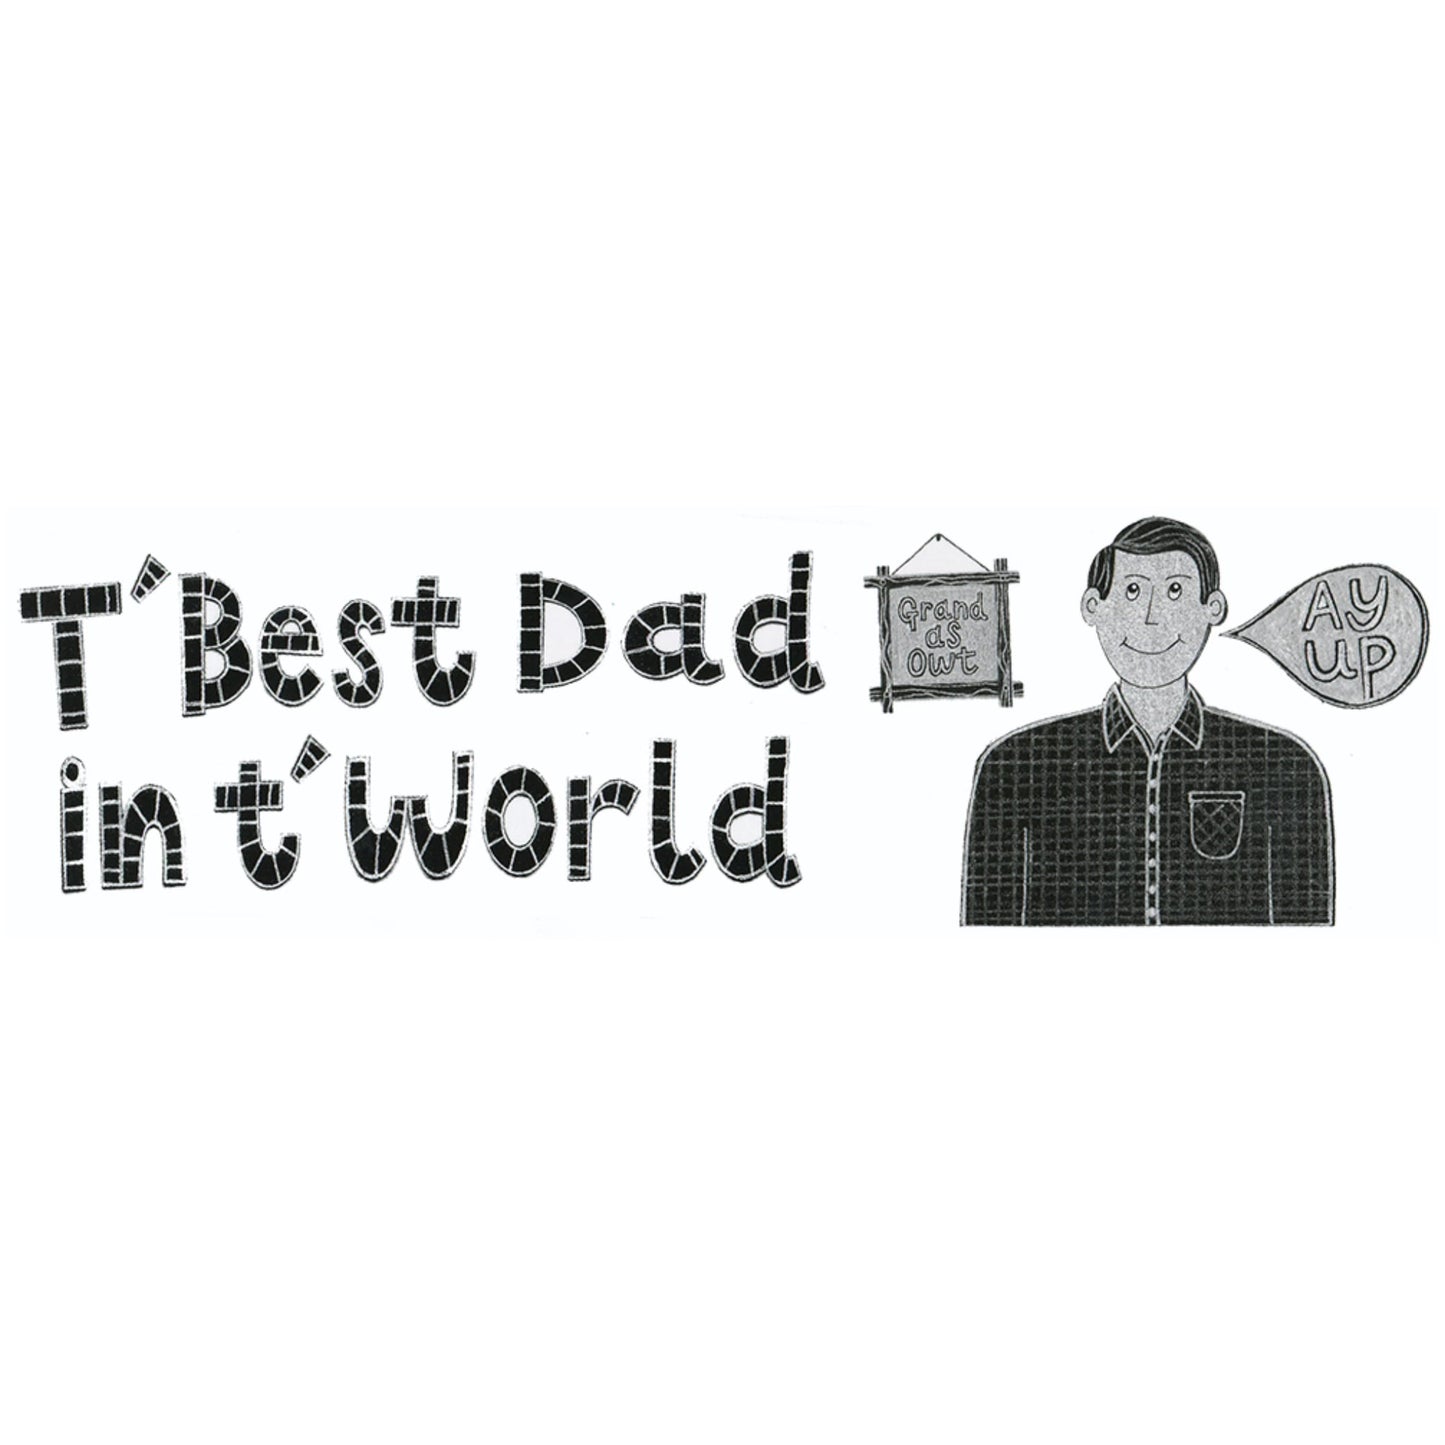 T'Best Dad in T'World Mug - The Great Yorkshire Shop